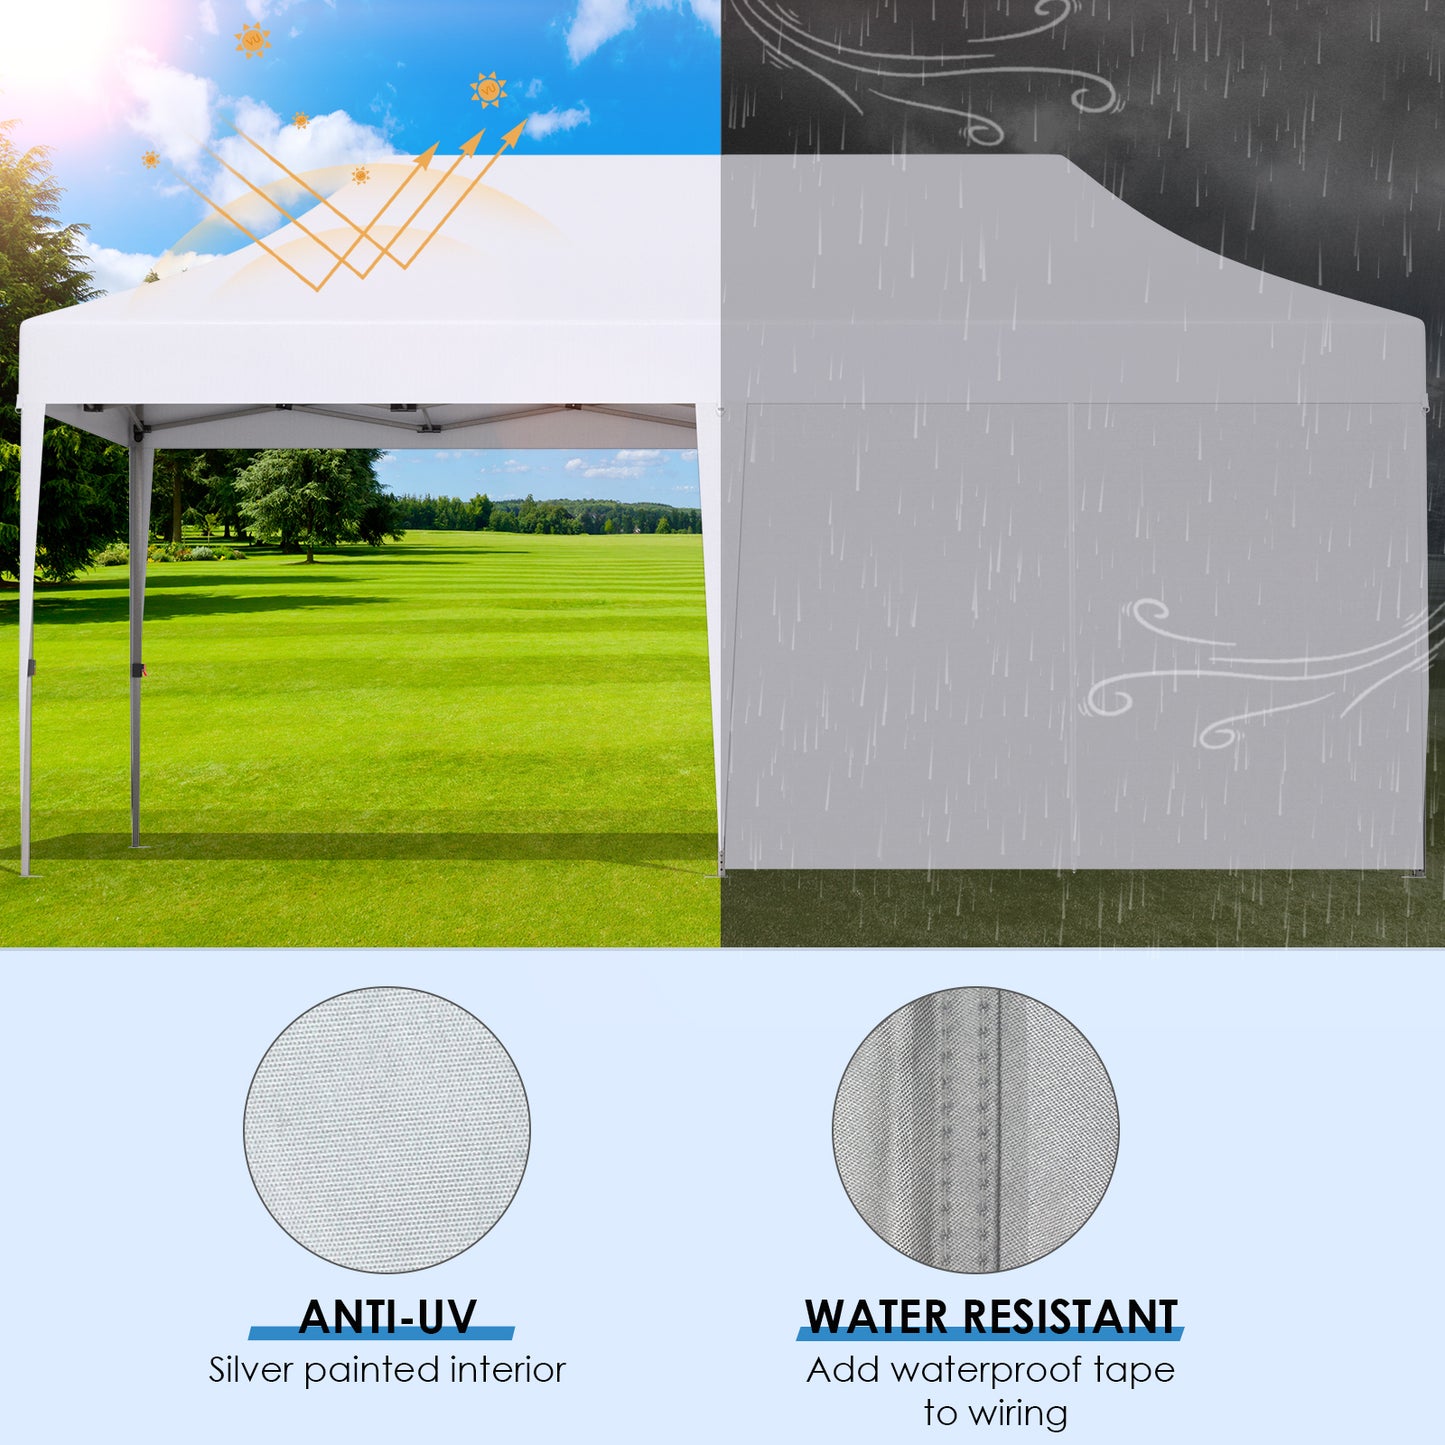 Arlopu 10x20ft Pop up Canopy Tent with 6 Sidewalls, Heavy Duty Commercial Instant Gazebo w/Wheeled Bag, All Season Outdoor Easy Set up Wedding Party Tents, 6 Windproof Ropes, 12 Stakes, 6 Sandbags